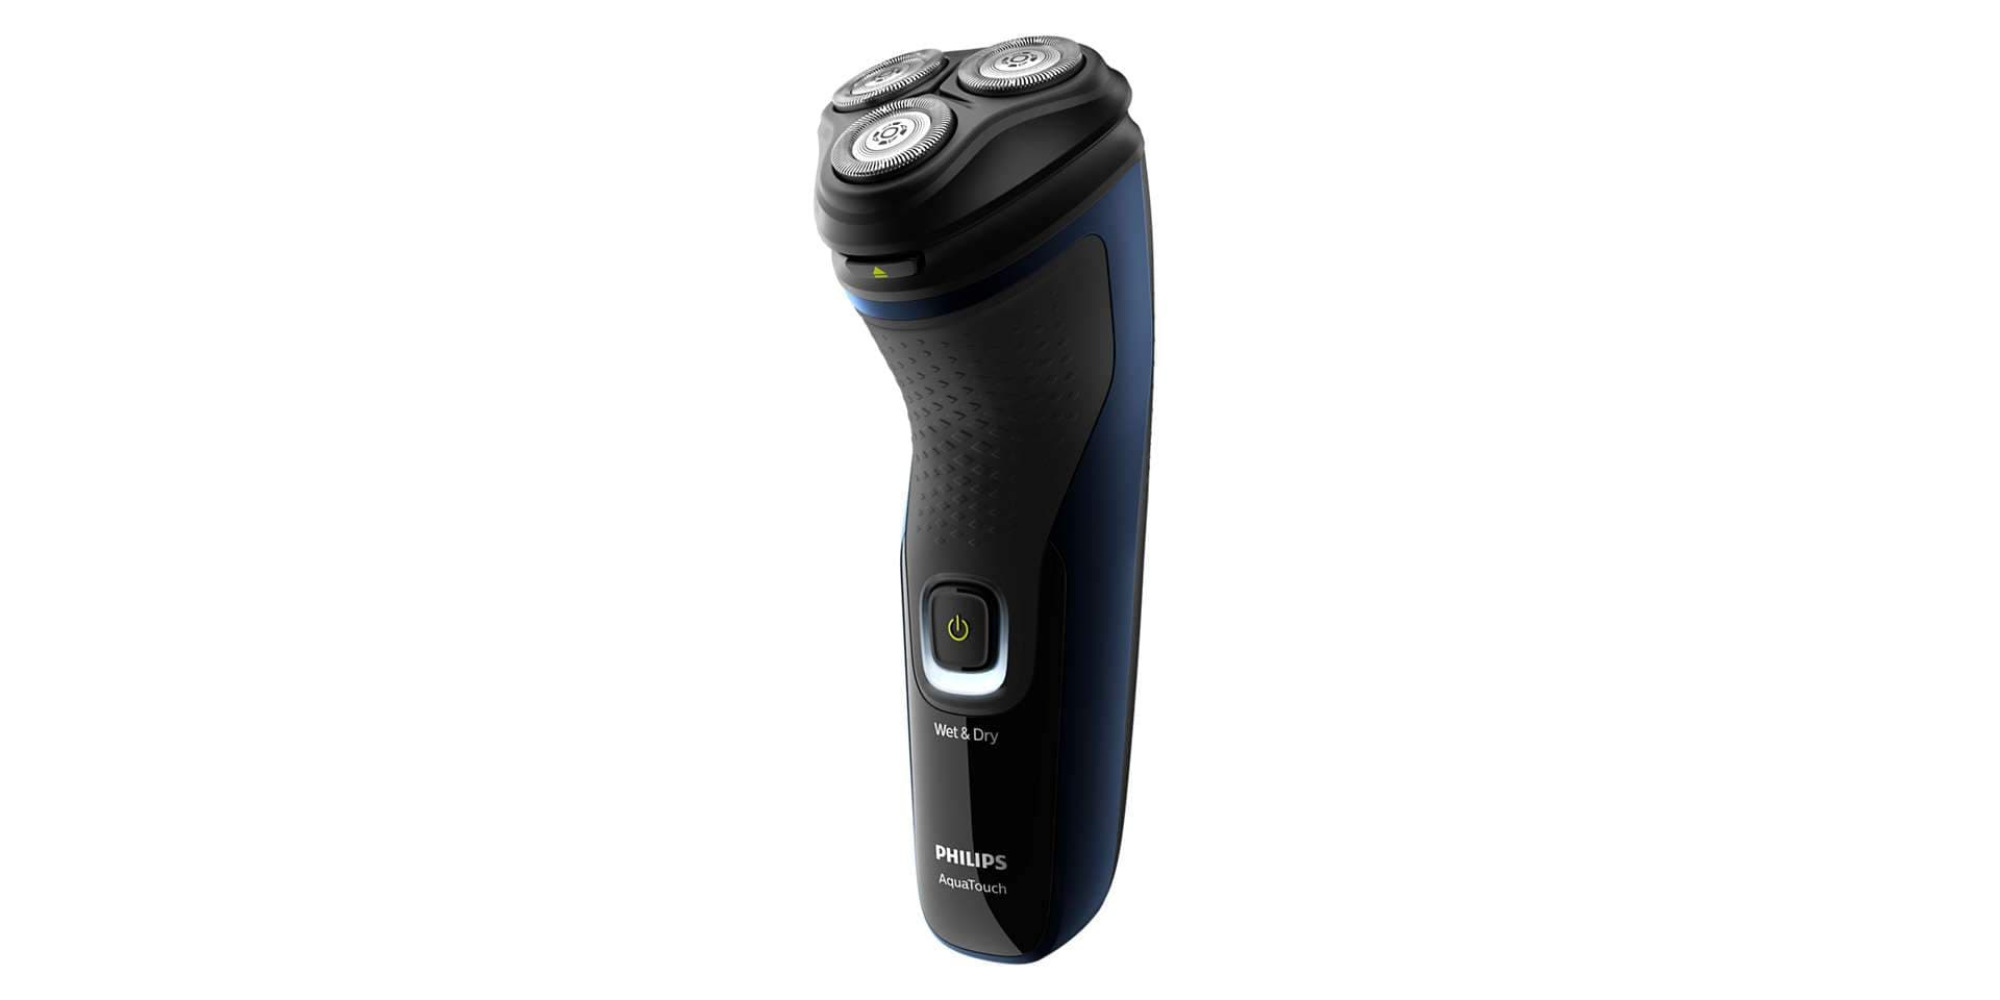 PHILIPS SERIES 1000 WET & DRY SHAVER